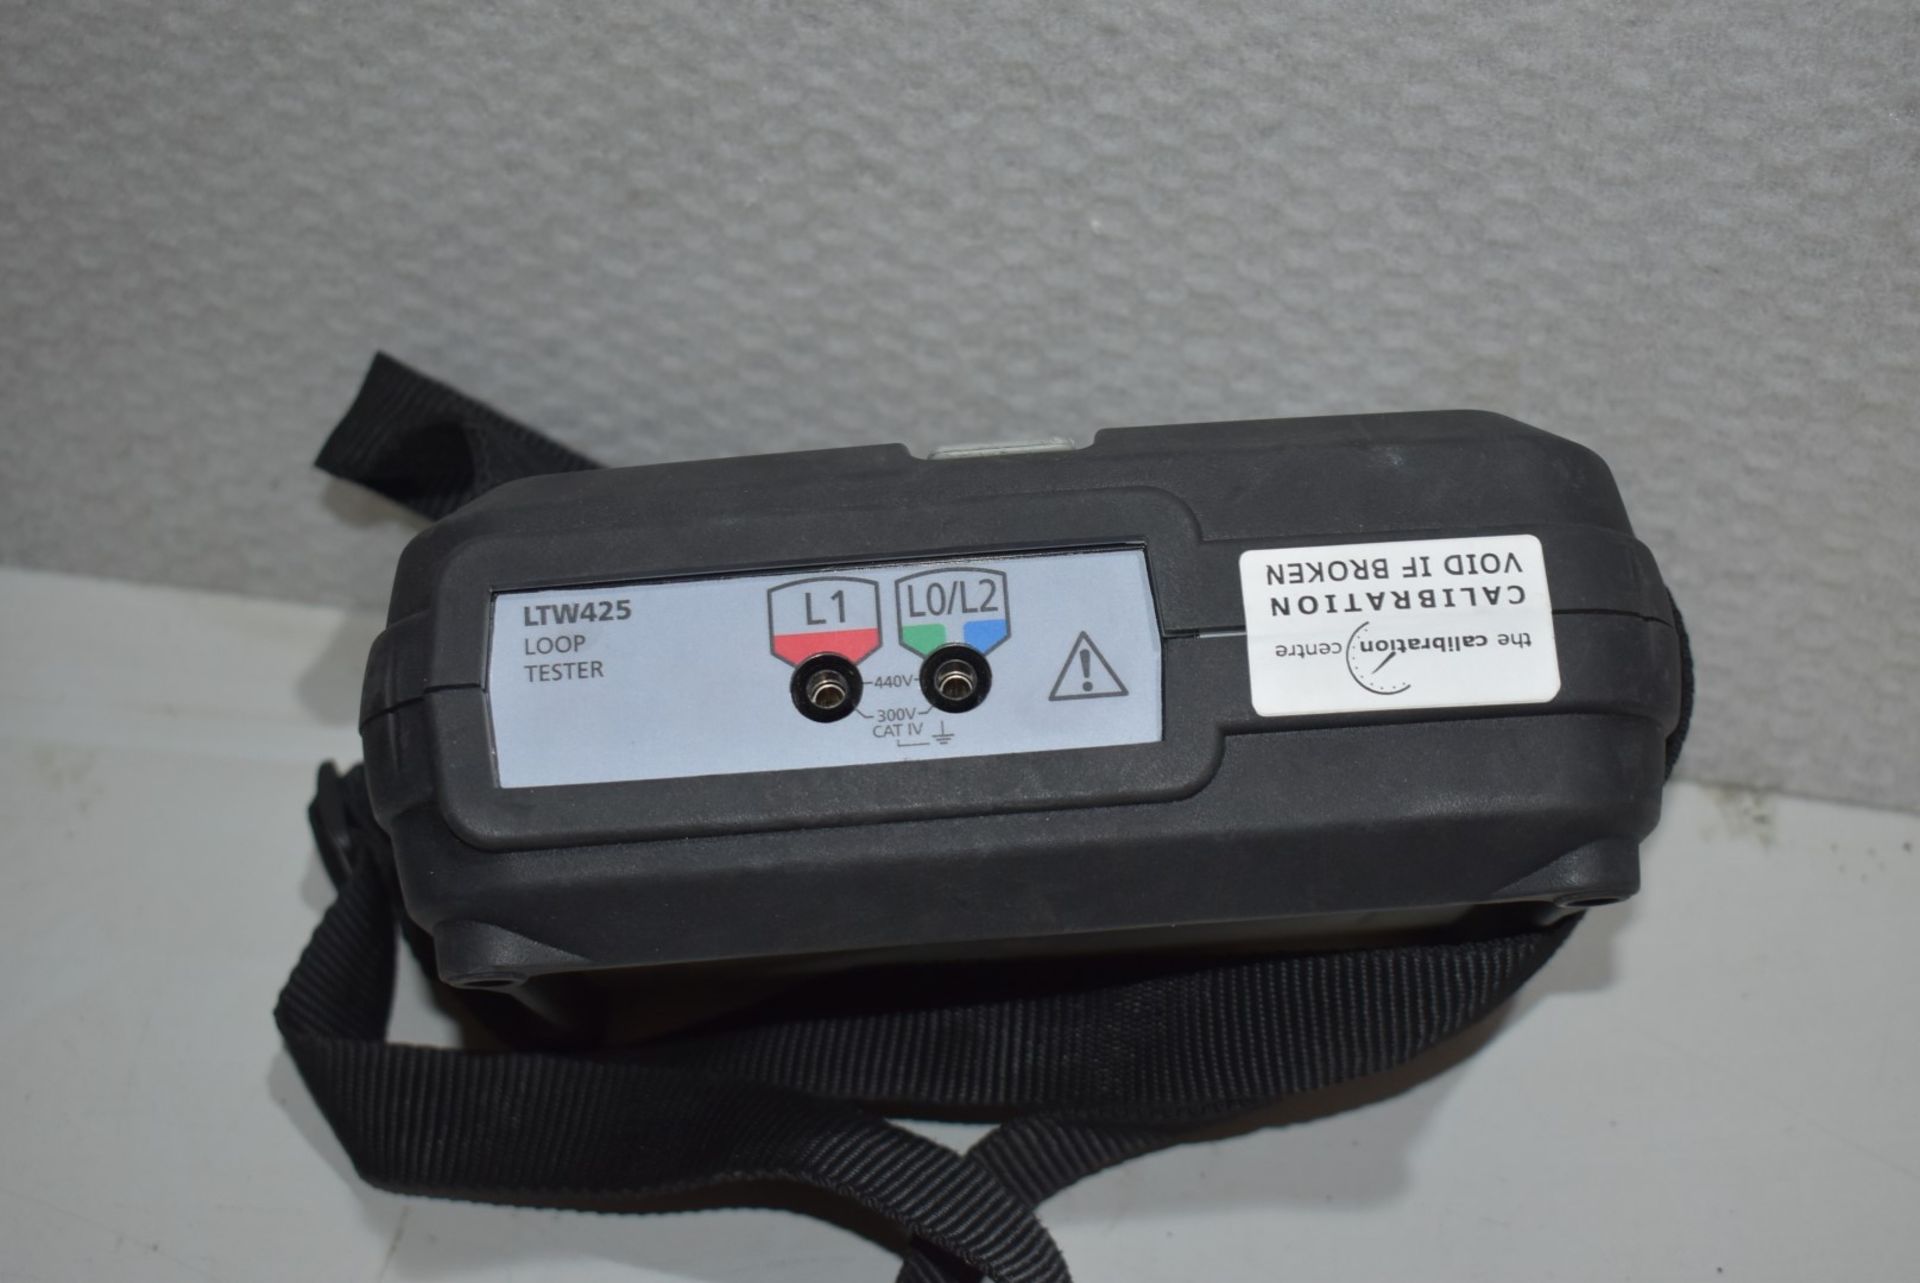 1 x MEGGER LTW425 Two-wire Non-tripping High Resolution Loop Tester - Ref: DS7549 ALT - CL816 - - Image 5 of 7